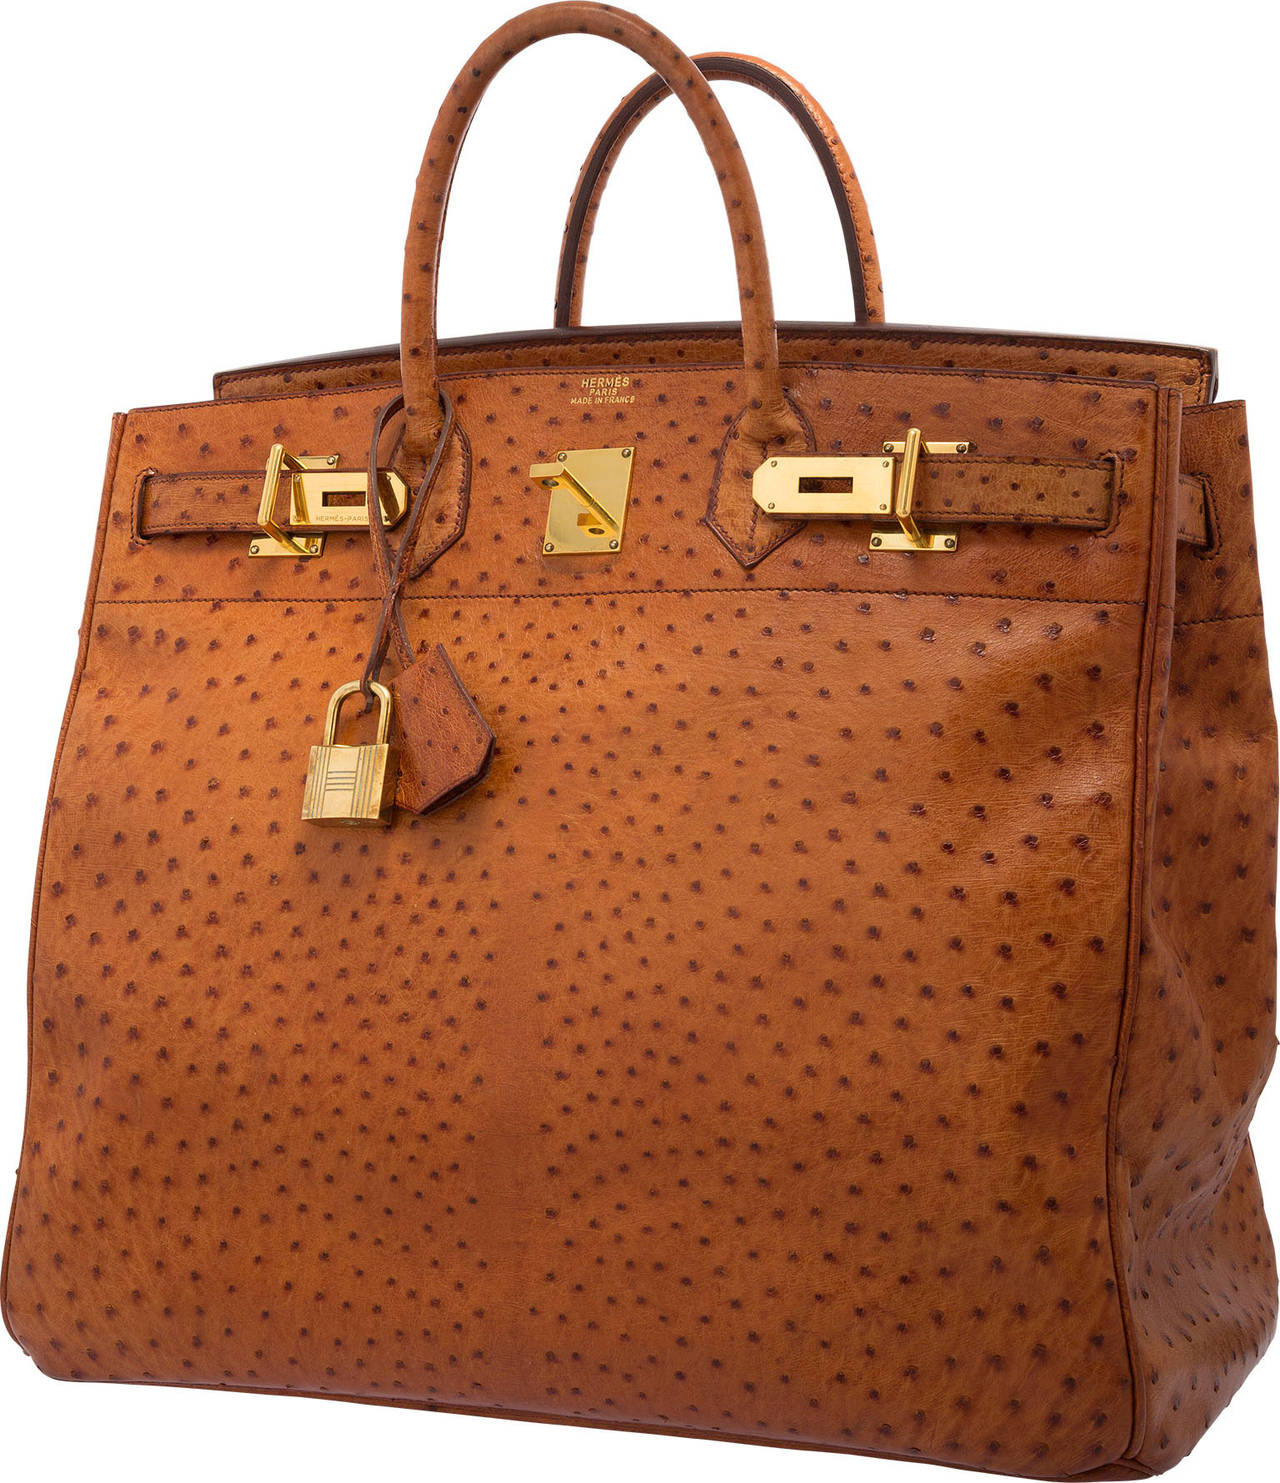 The HAC was actually the original design of the now iconic Hermes Birkin bag. This fantastic piece is done in Cognac Ostrich skin with Gold Hardware. Today, Hermes will not make any Ostrich skin bags larger than 30cm making this bag, at a whopping